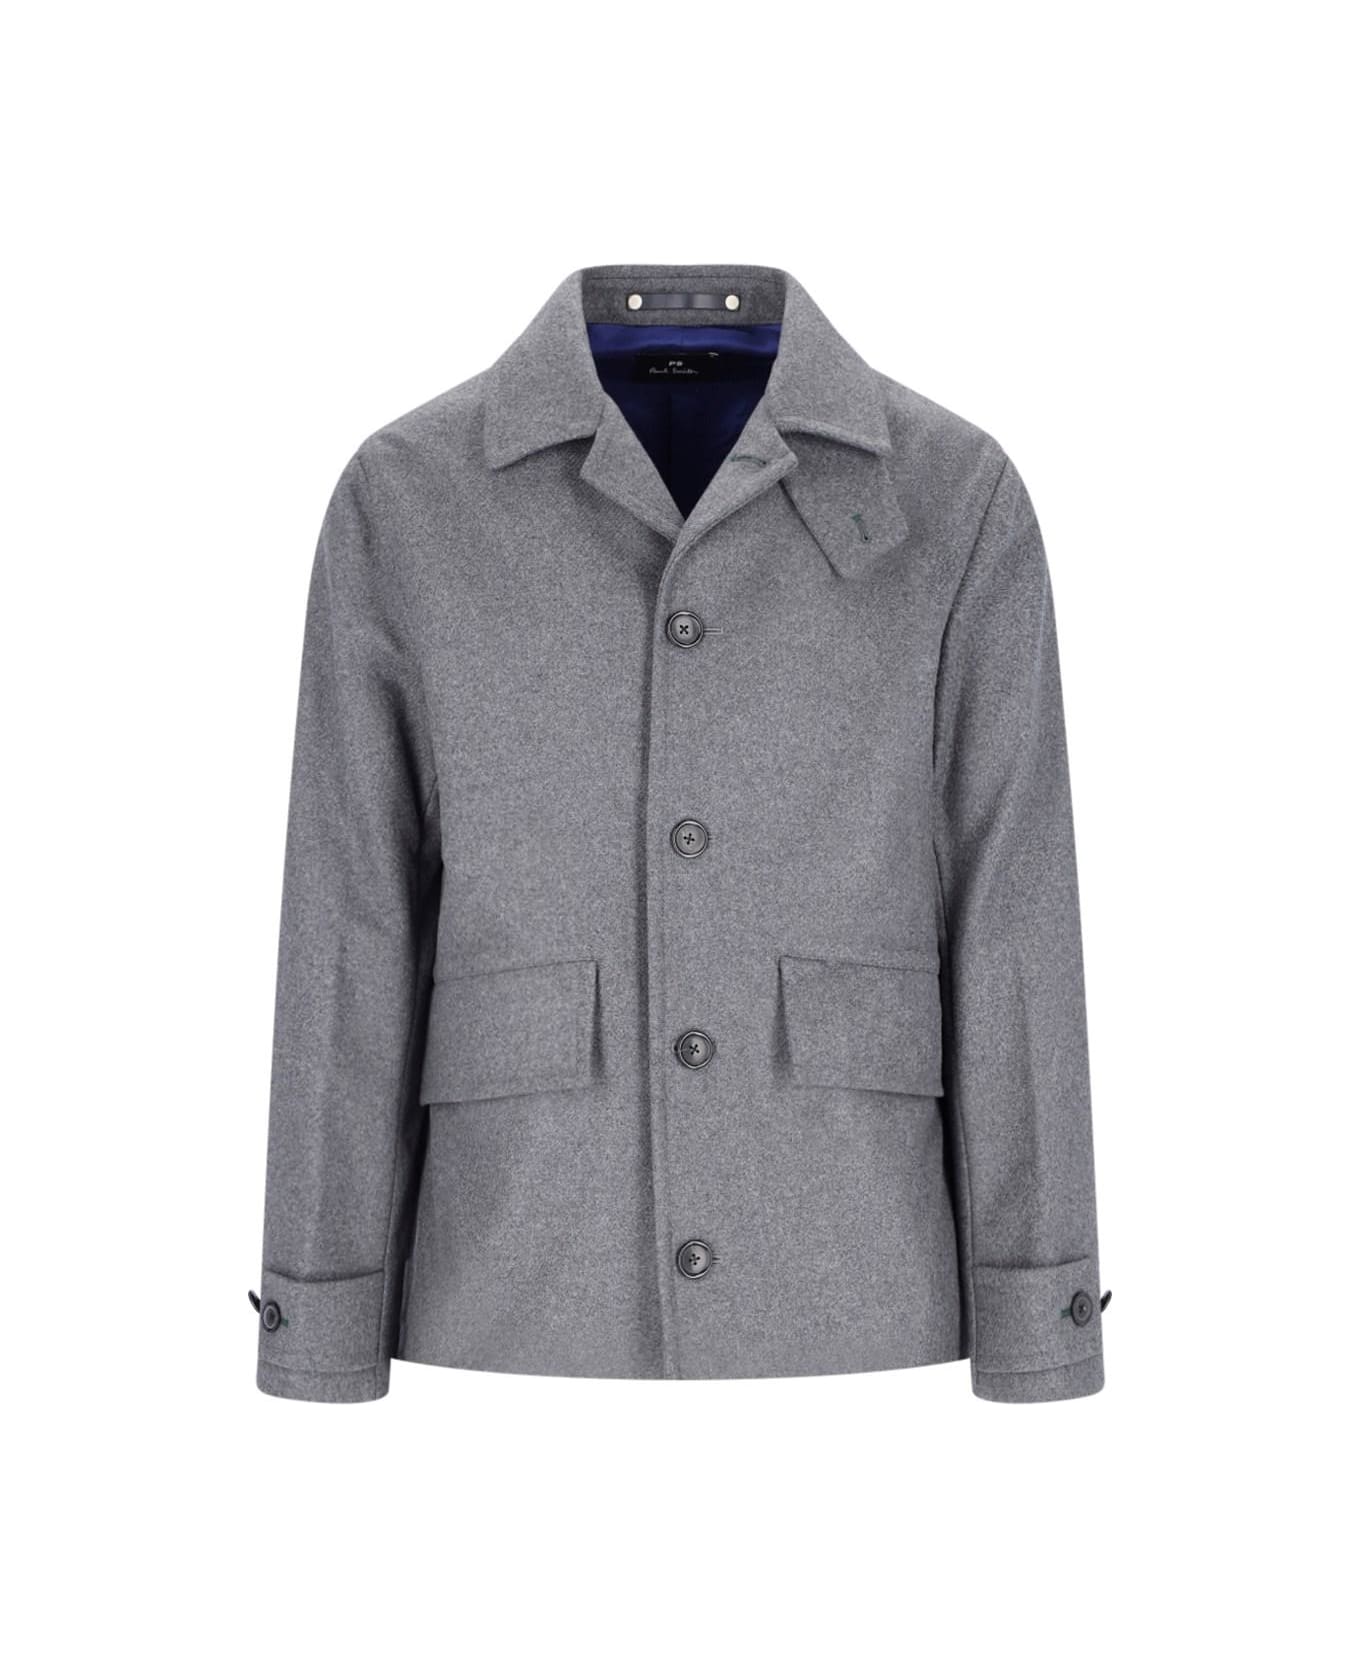 Paul Smith Wool And Cashmere Jacket